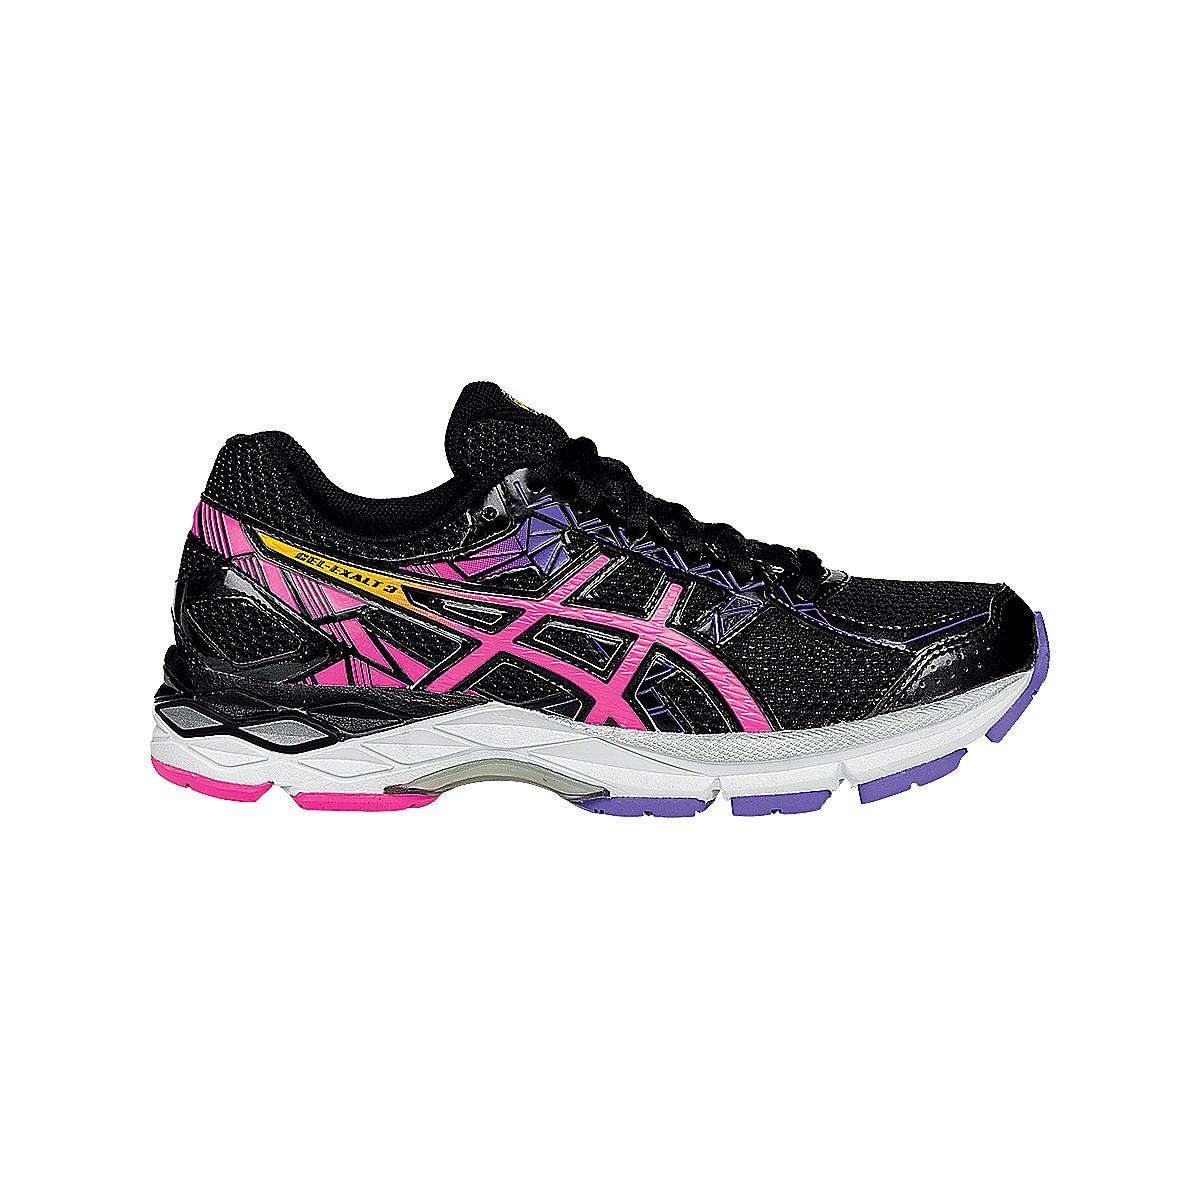 Womens Altra Intuition 3.5 Running Shoe at Road Runner Sports